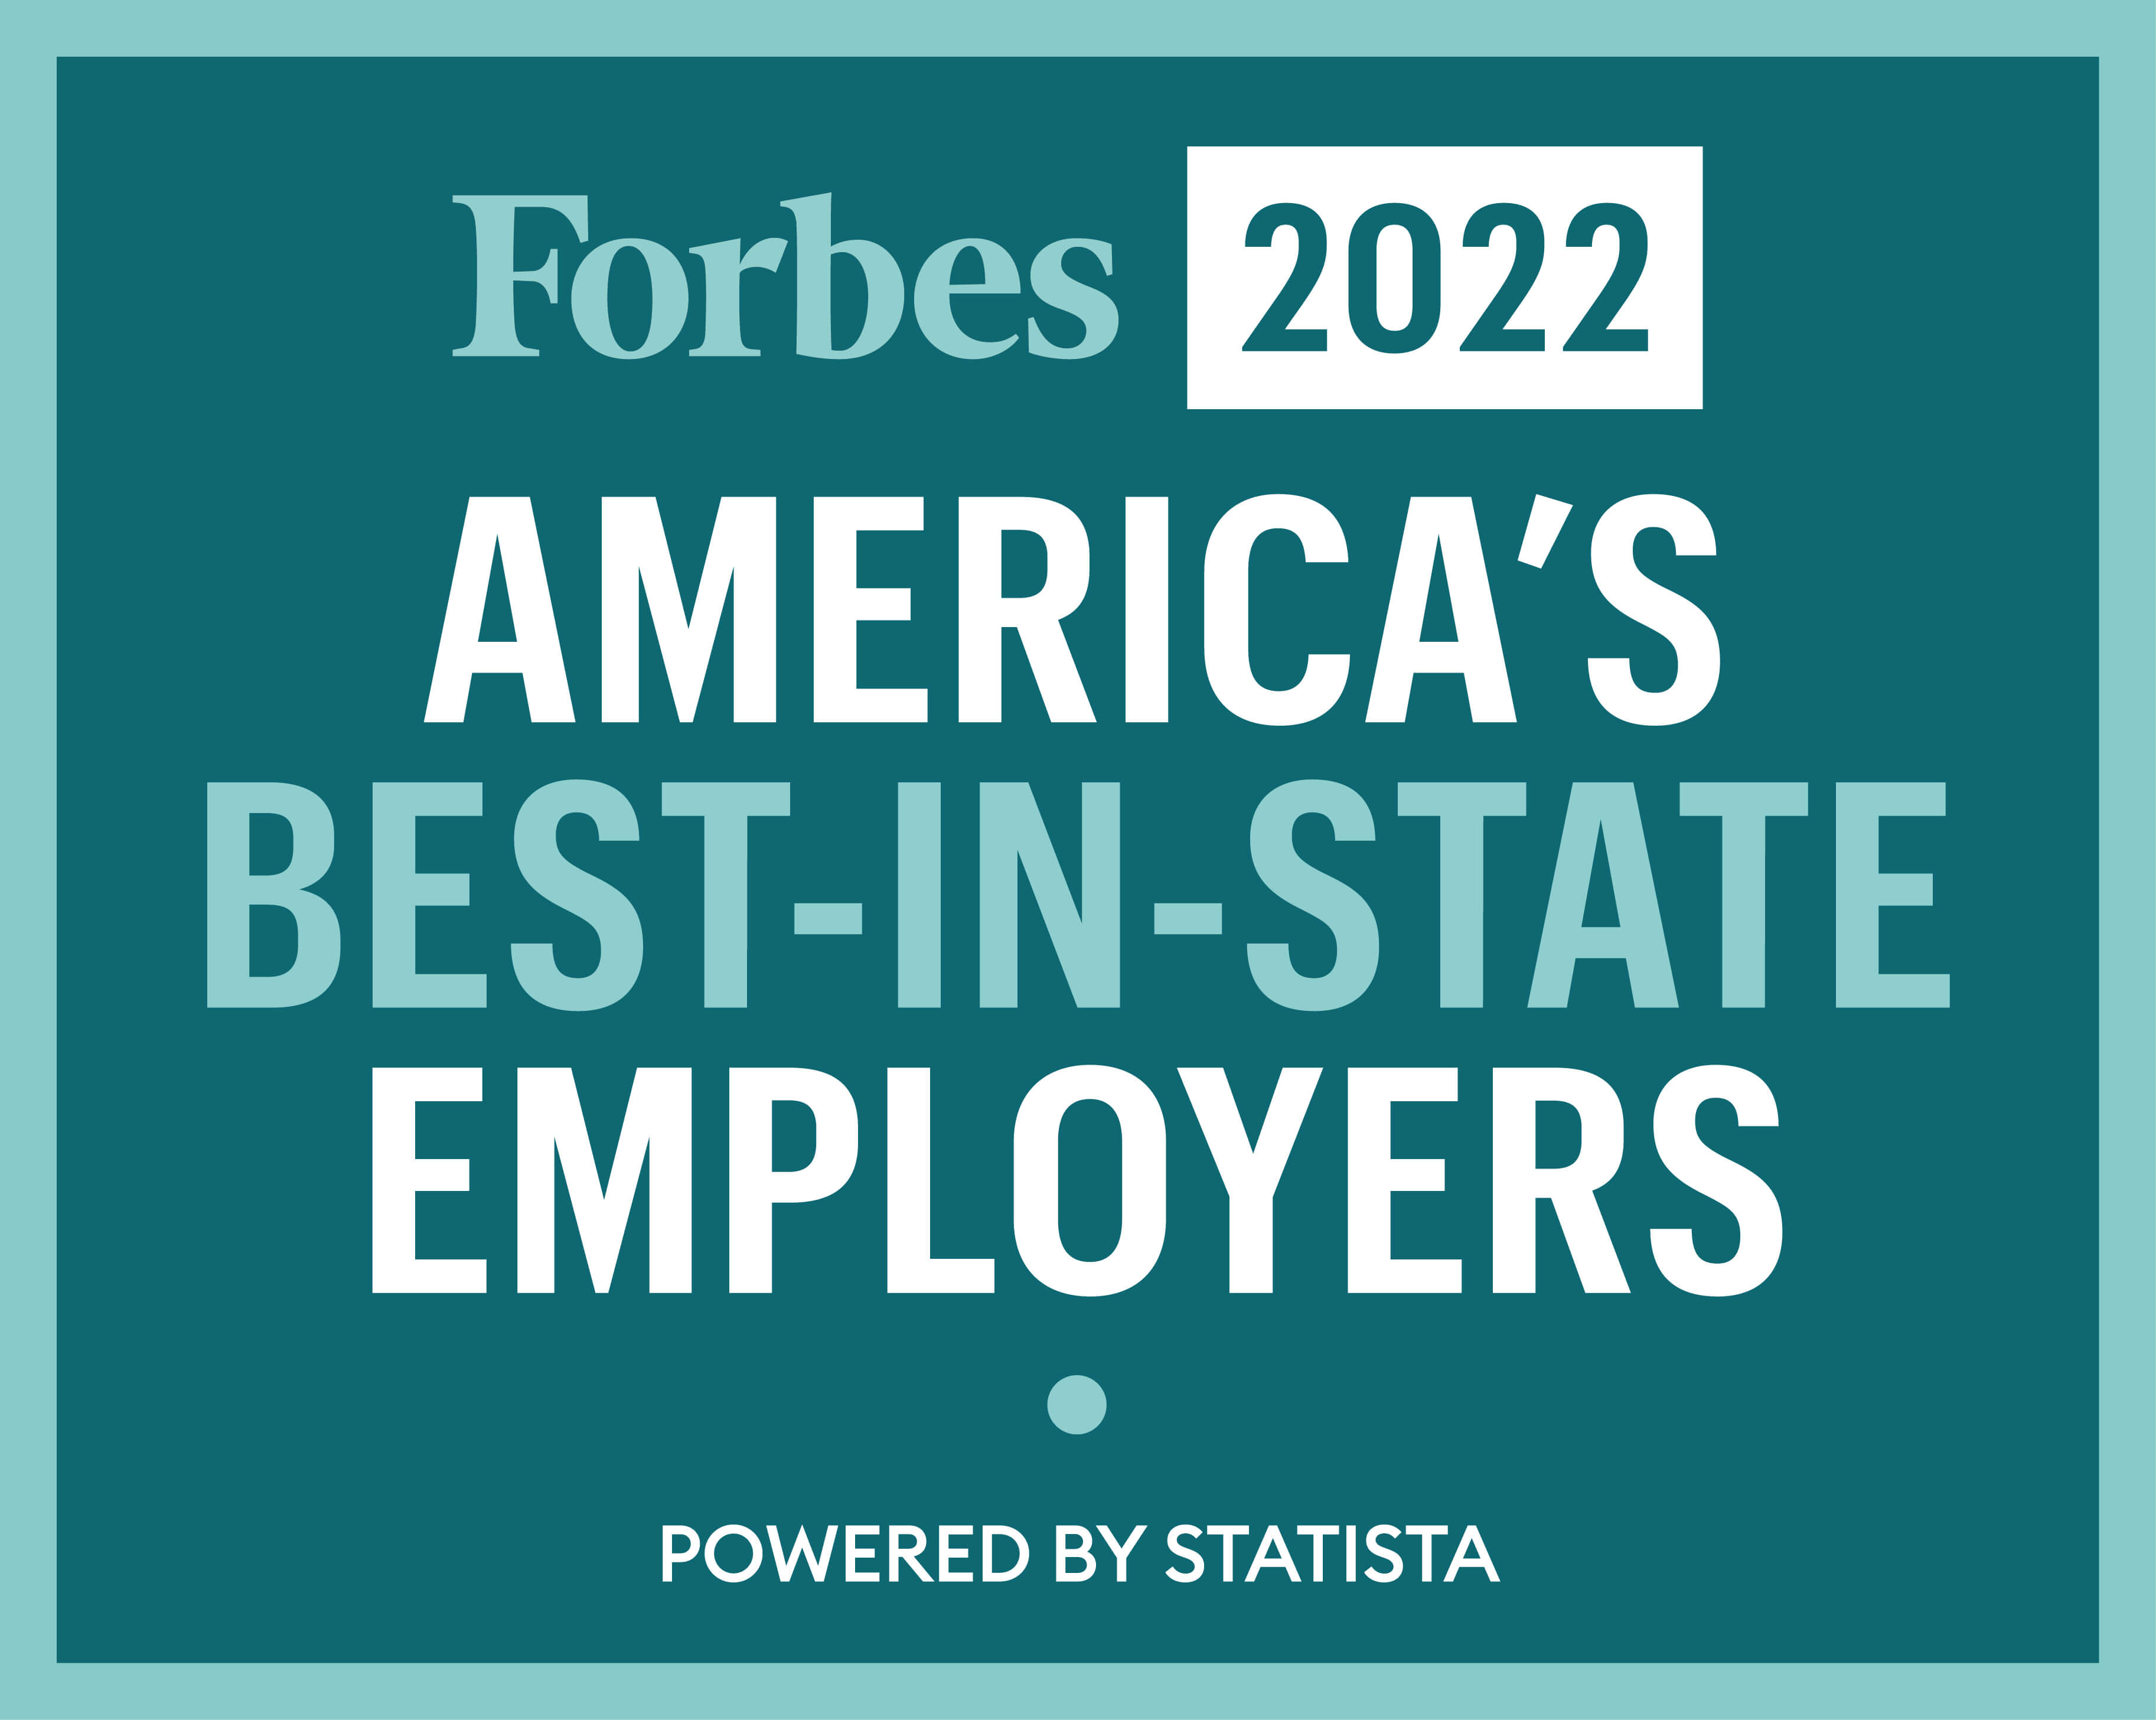 Bassett Healthcare Network Named to Forbes Best-in-State Employers List for 2022